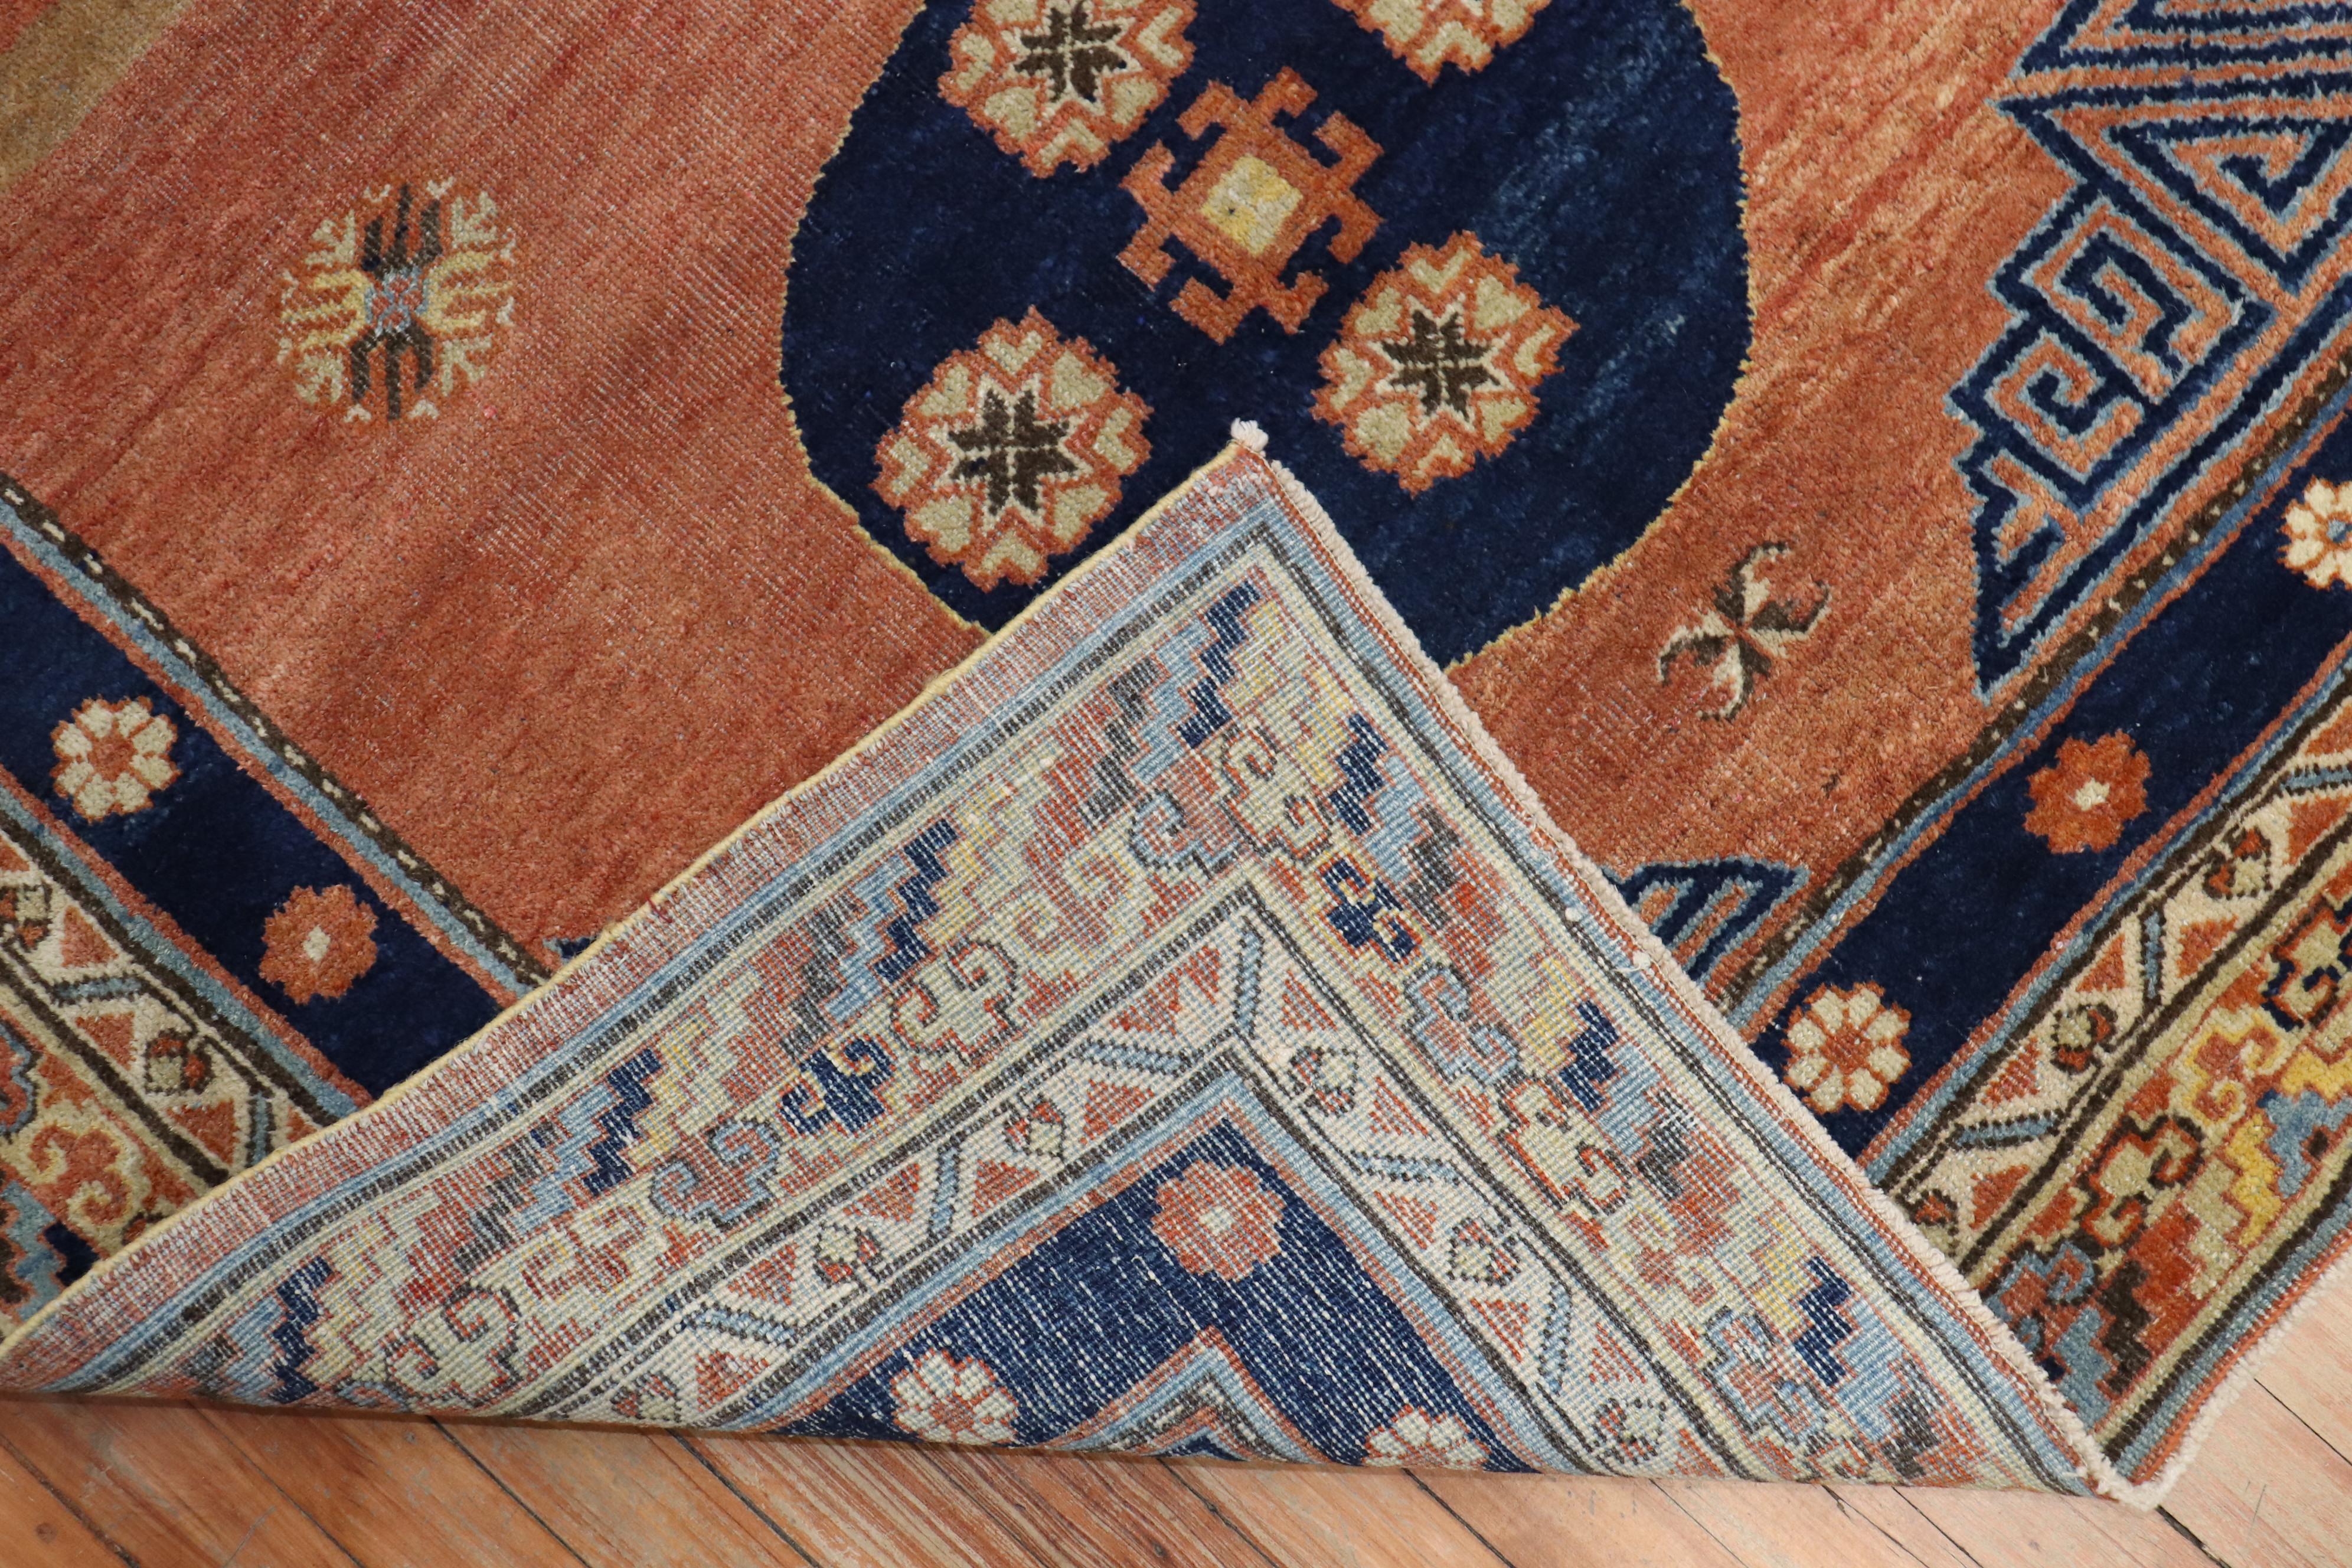 Hand-Woven Rare Matching Pair of Antique Khotan Carpets For Sale